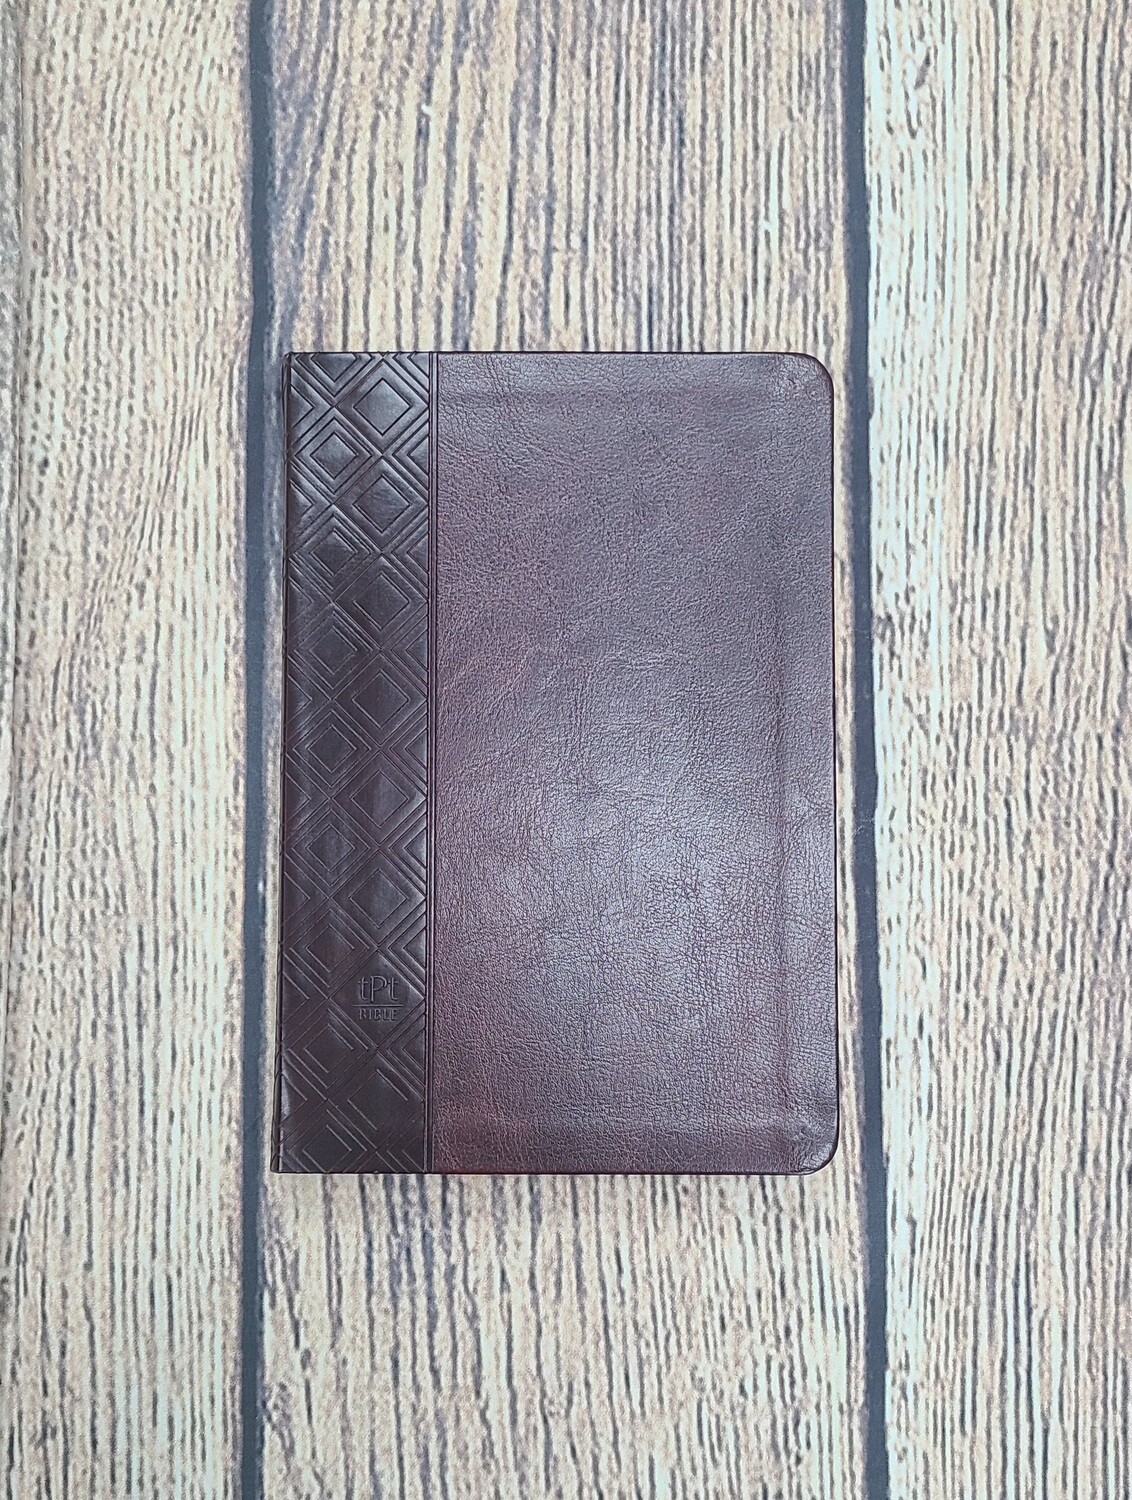 The Passion Translation - The New Testament - God Encounters Custom Edition - Brown Leather